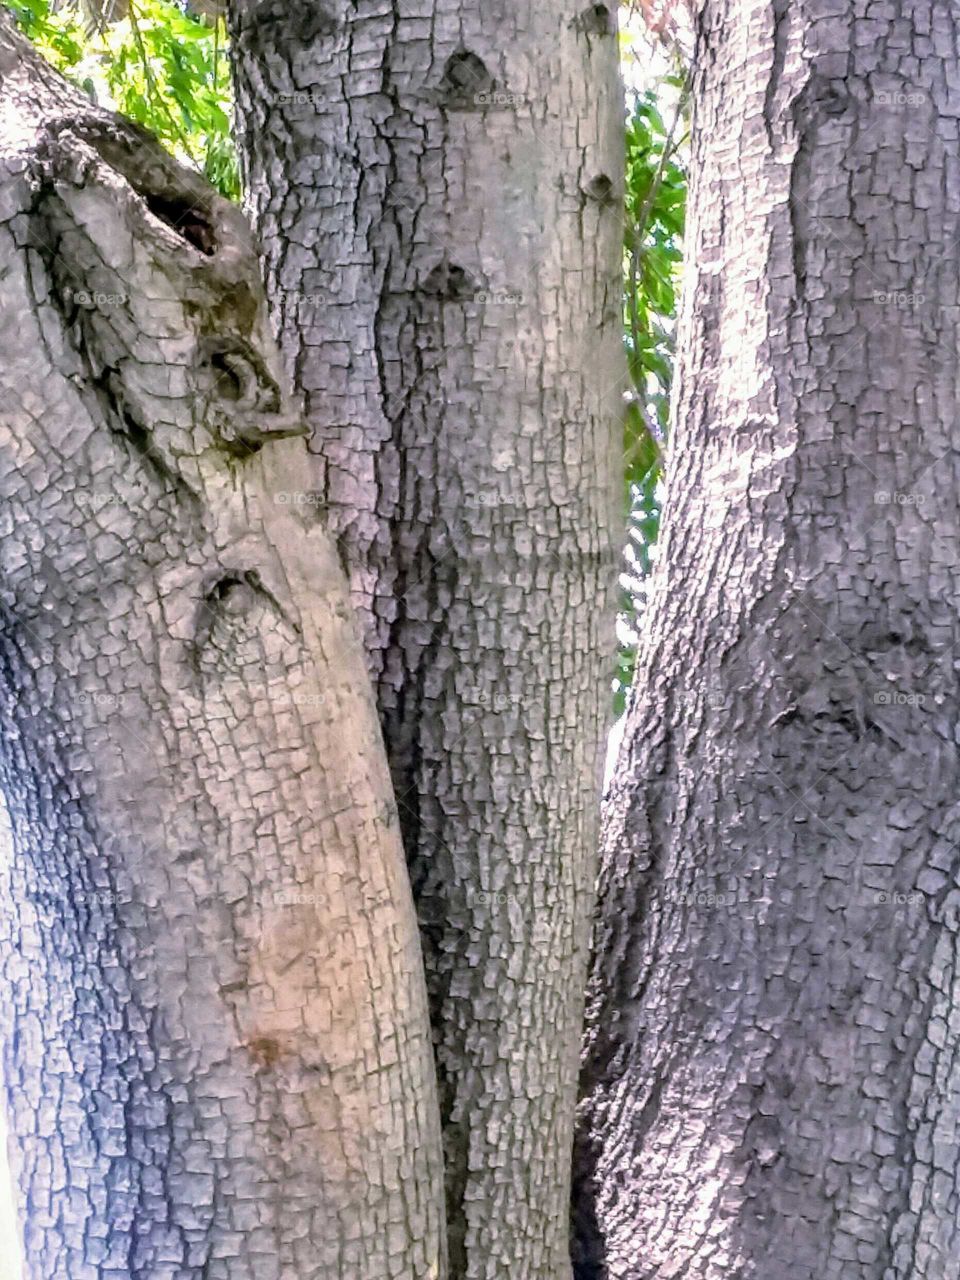 Three Tree Trunks Growing Together